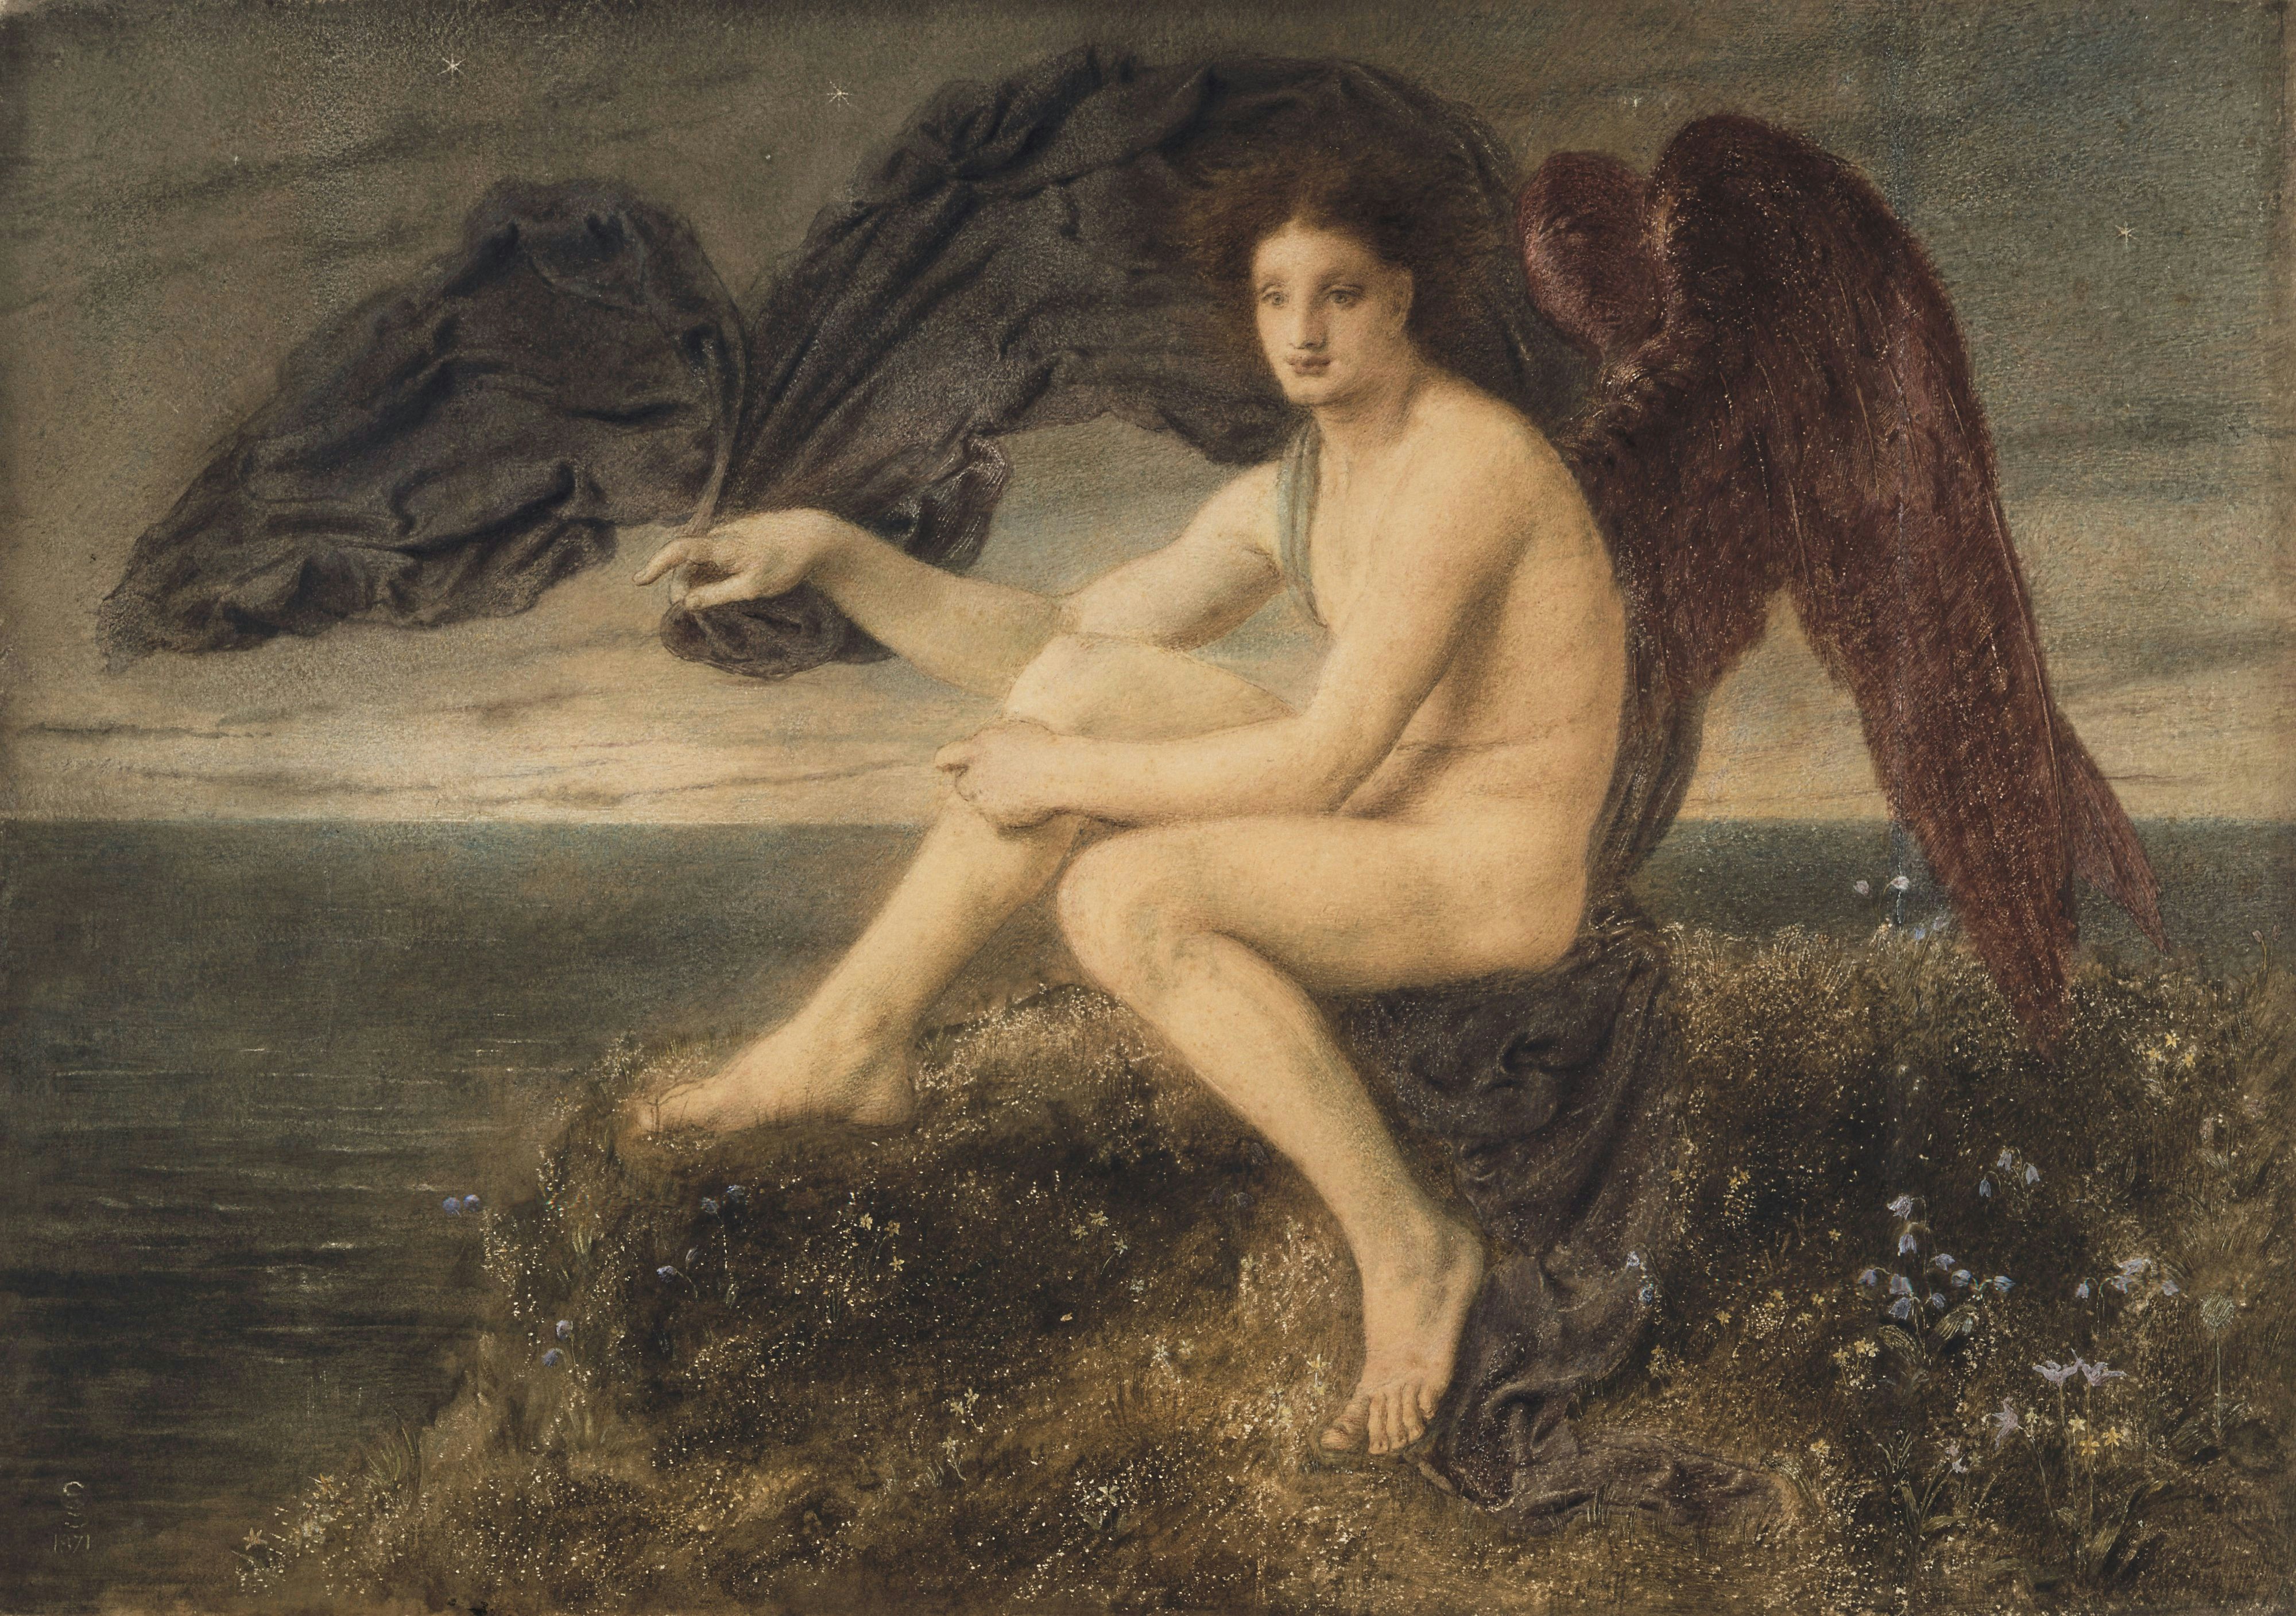 Dawn, 1871. By Simeon Solomon. One of a series of paintings to complement Simeon's own prose poem, 'A Vision of Love Revealed in Sleep'.